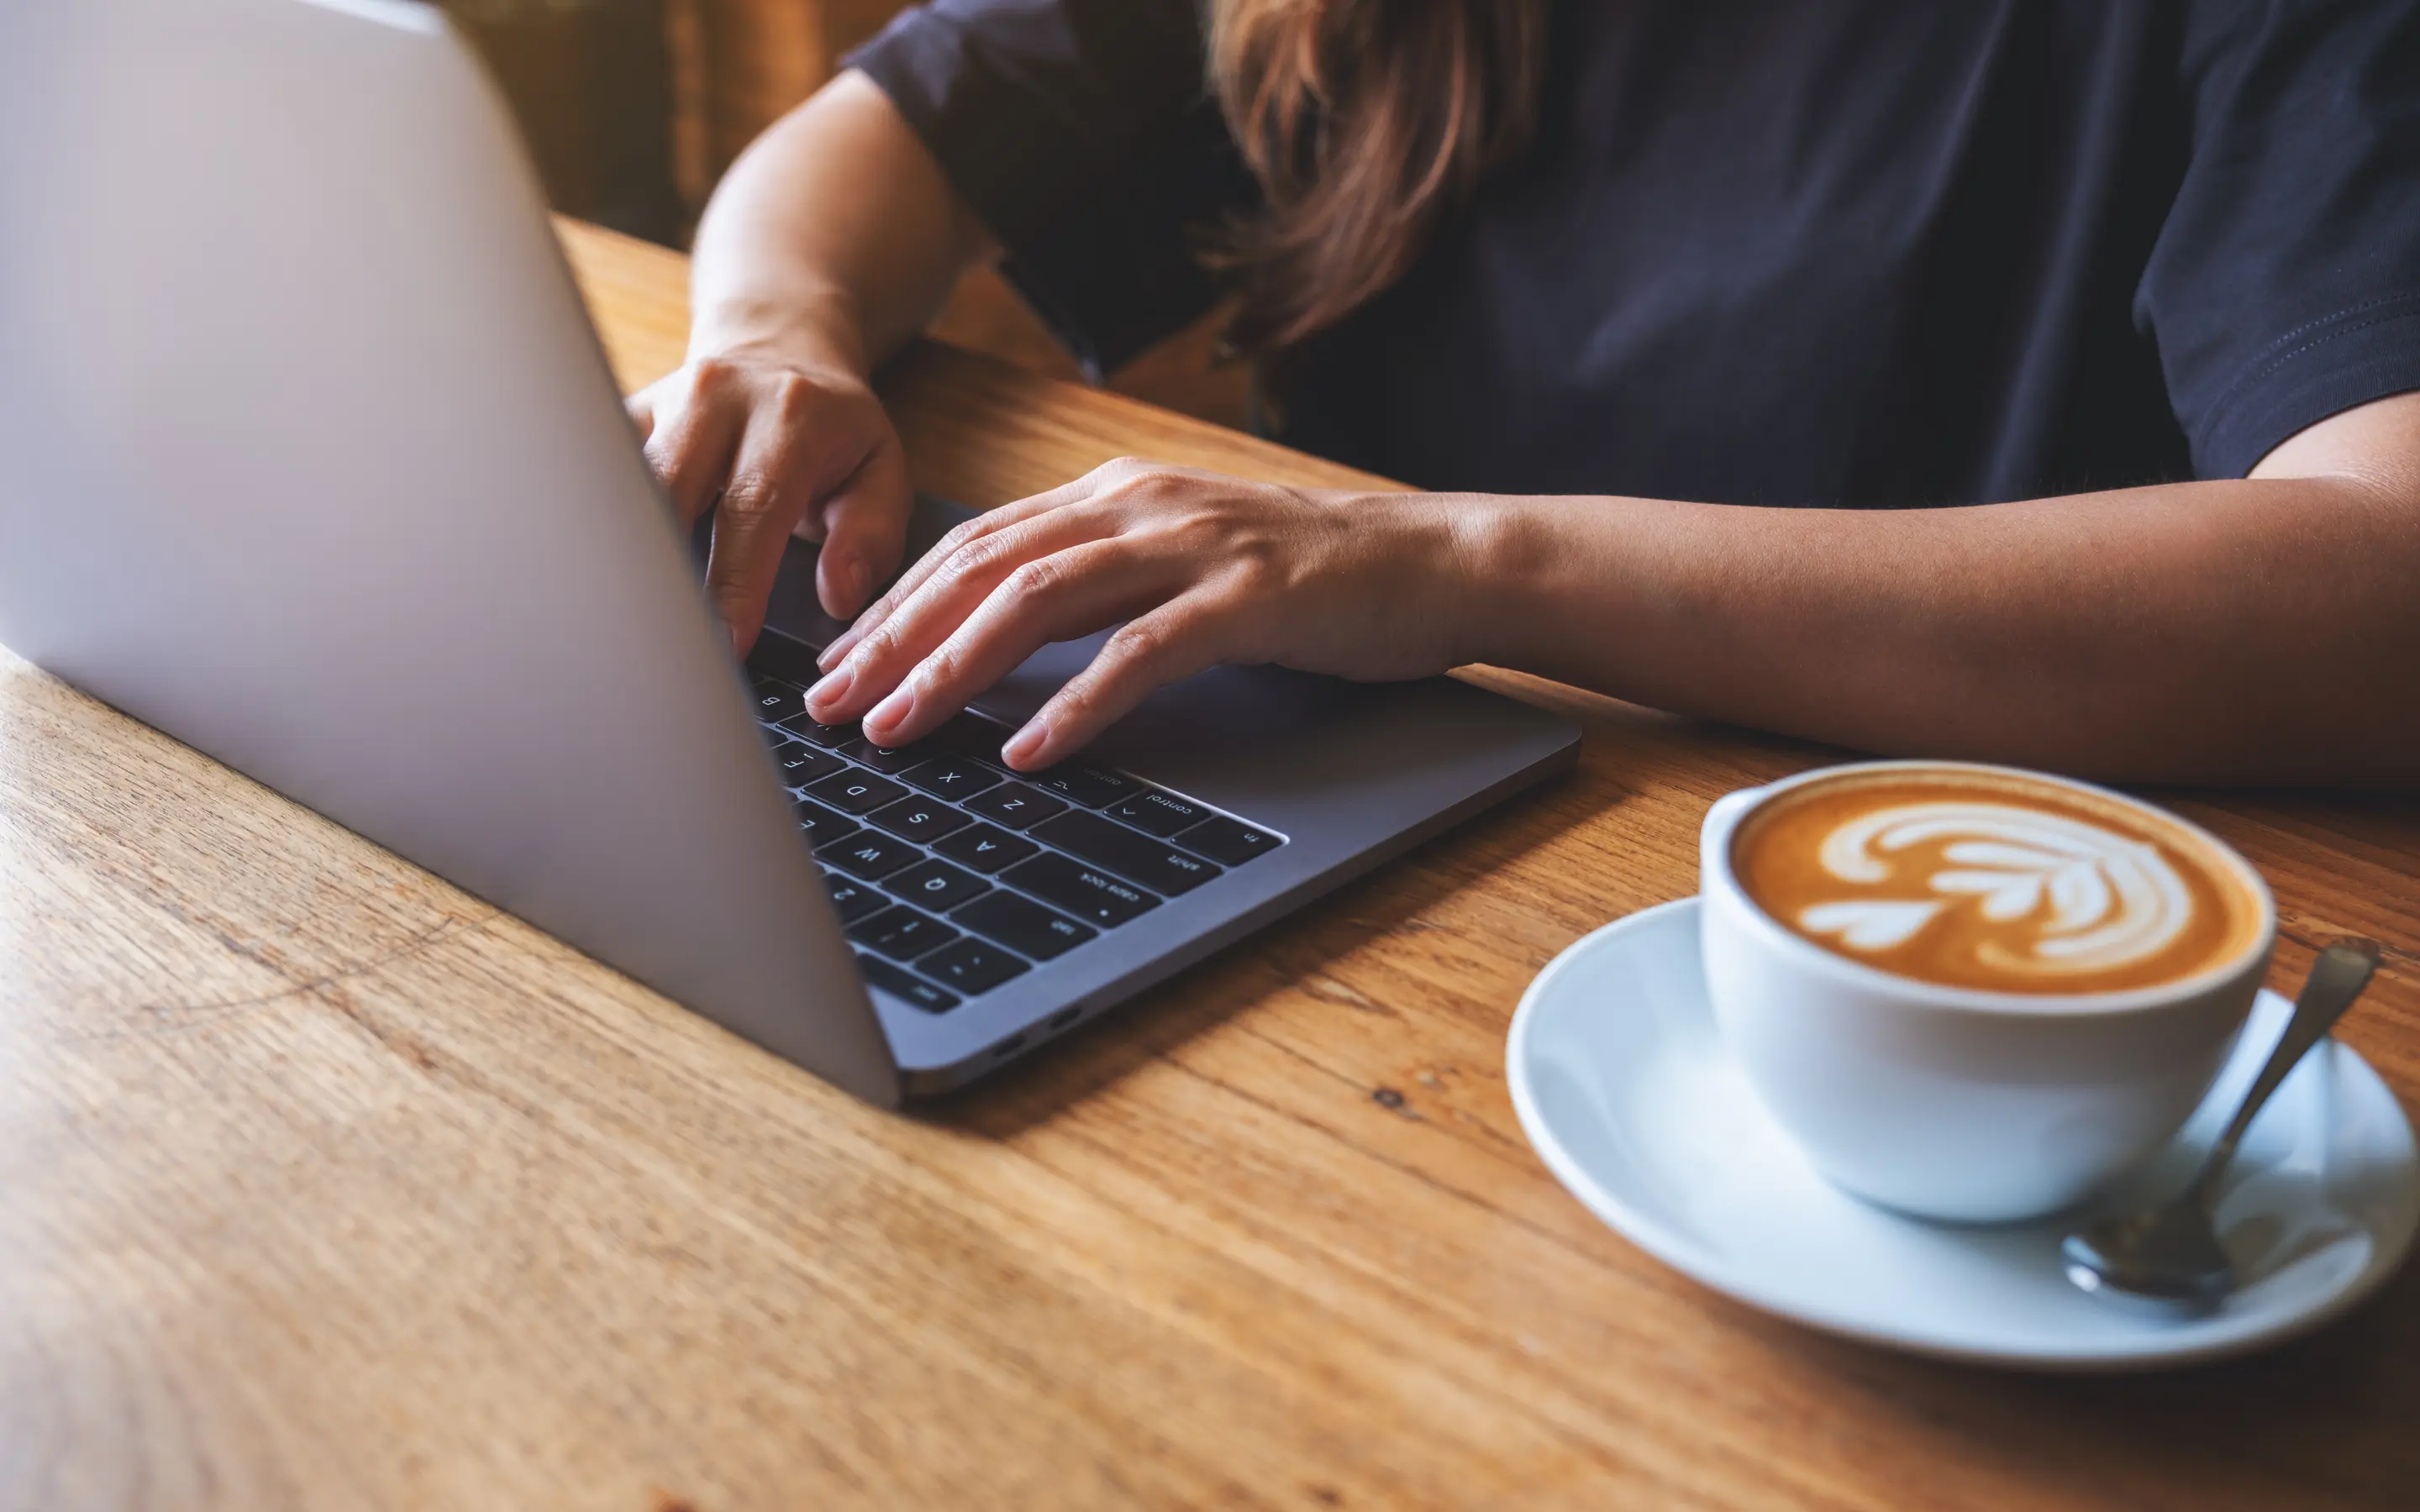 An image of a person's hands on a laptop keyboard with a cup of coffee to their left.